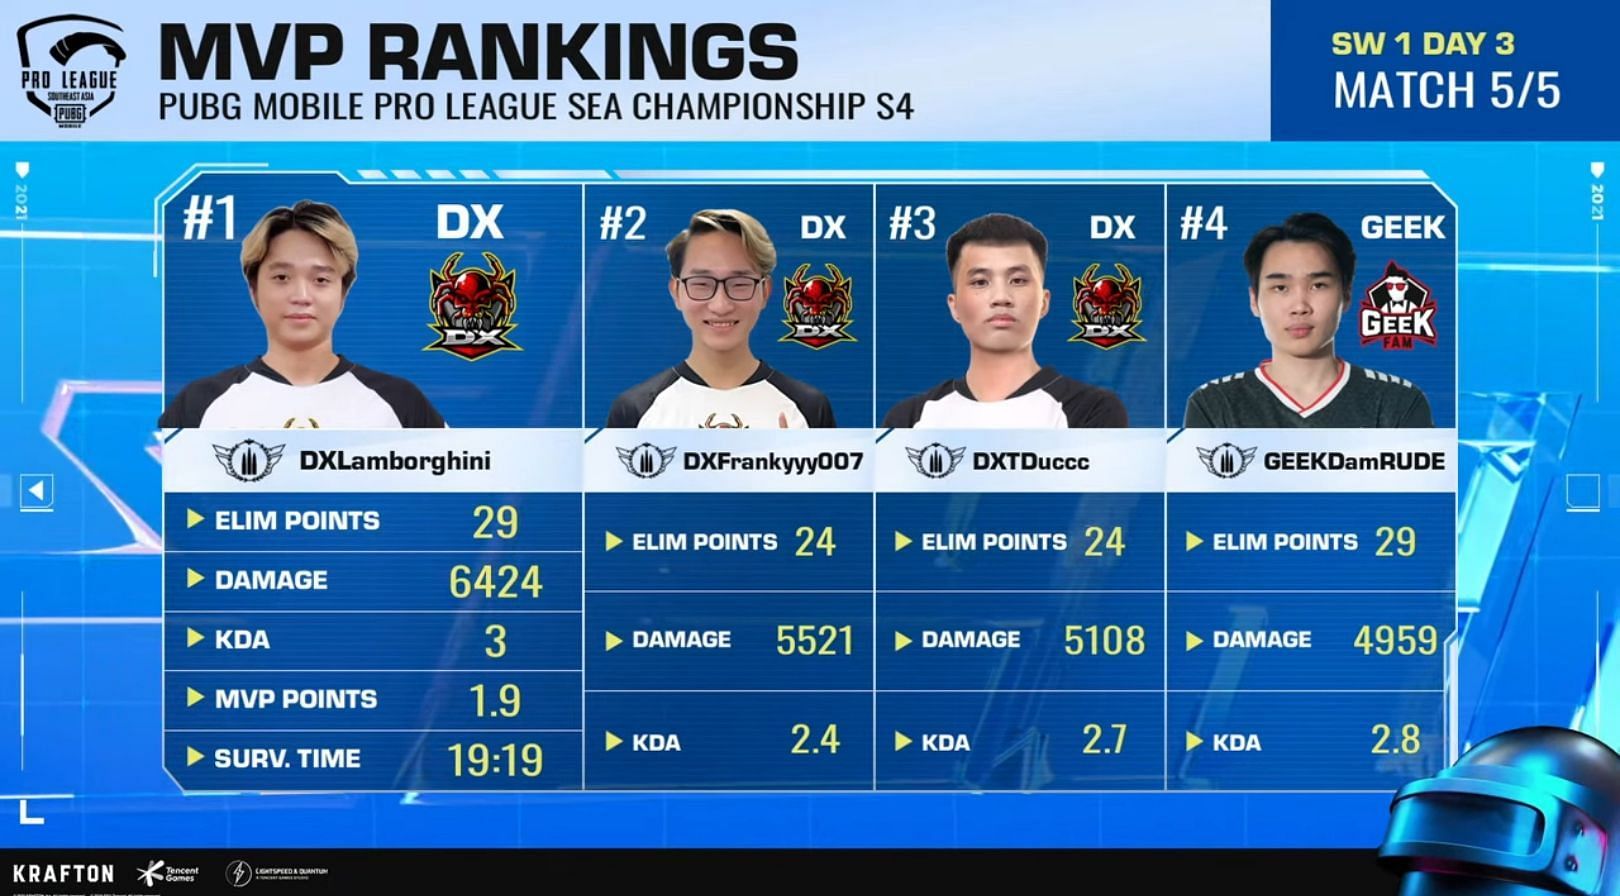 The MVP rankings after the PMPL SEA Championship S4 SW1